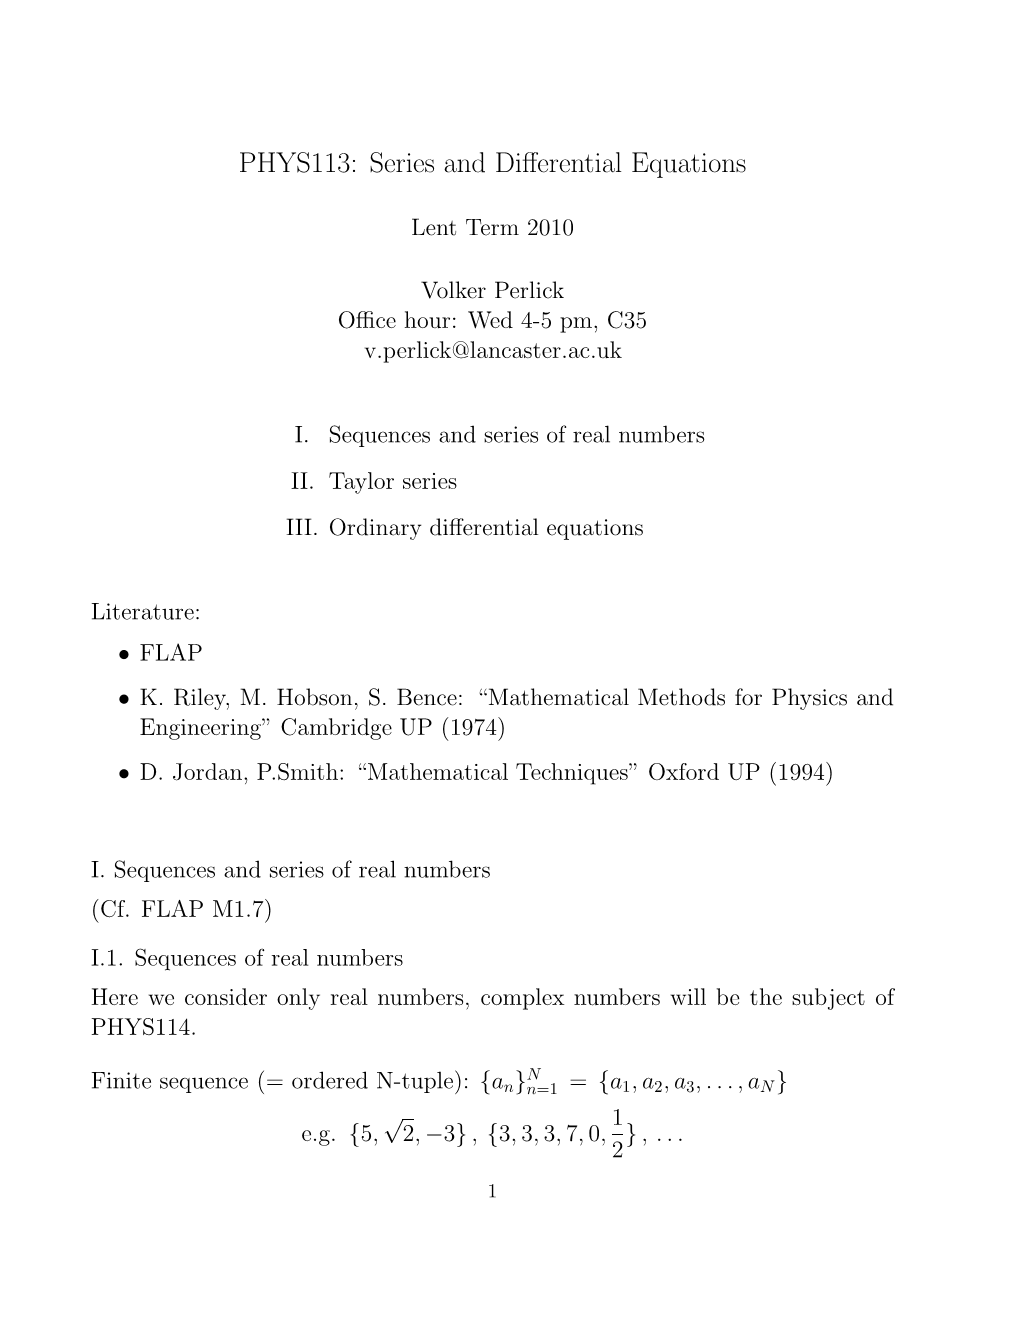 Series and Differential Equations